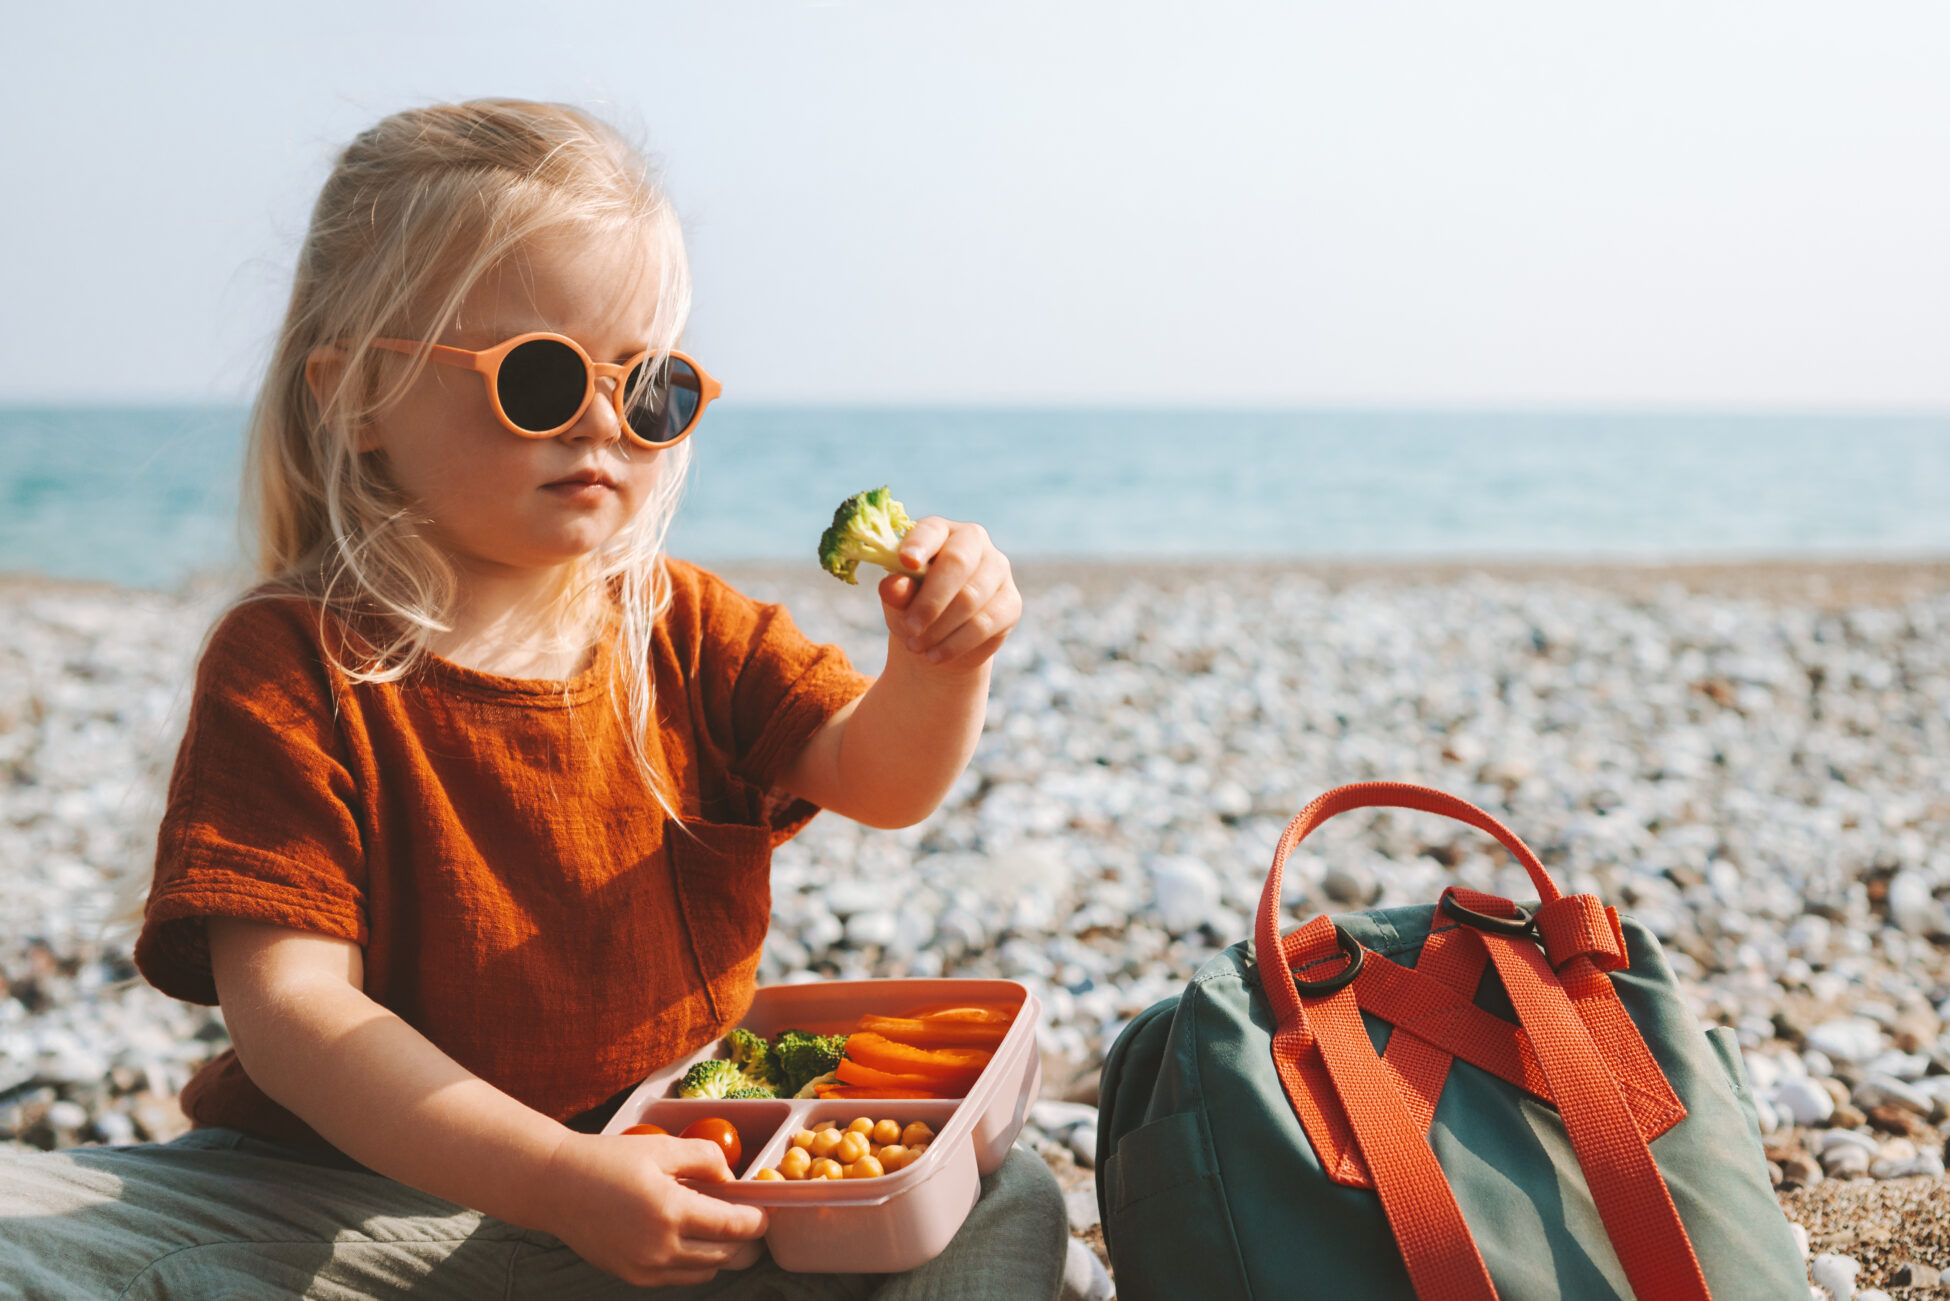 Young girl on beach enjouýing healthy vegetables from lunchbox at the beach